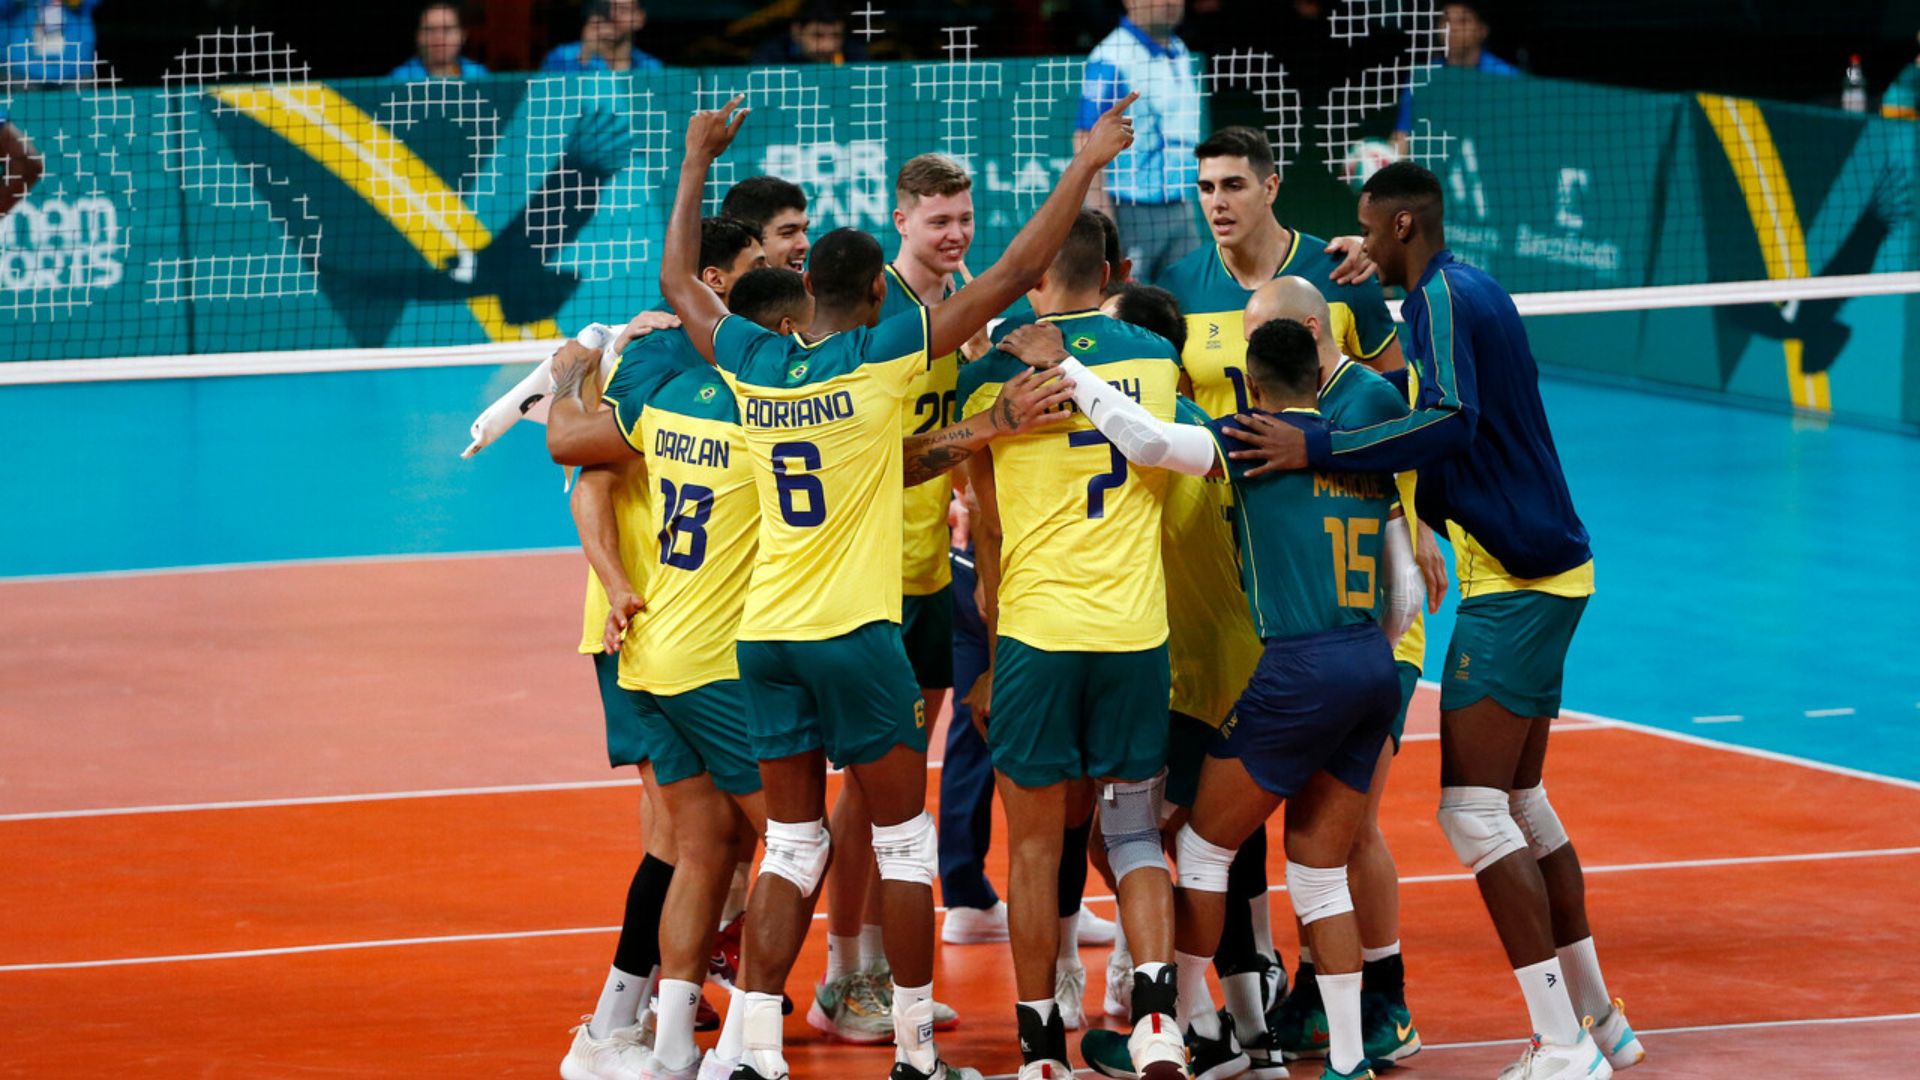 Brazil easily defeated Mexico and continues to dominate in male's volleyball